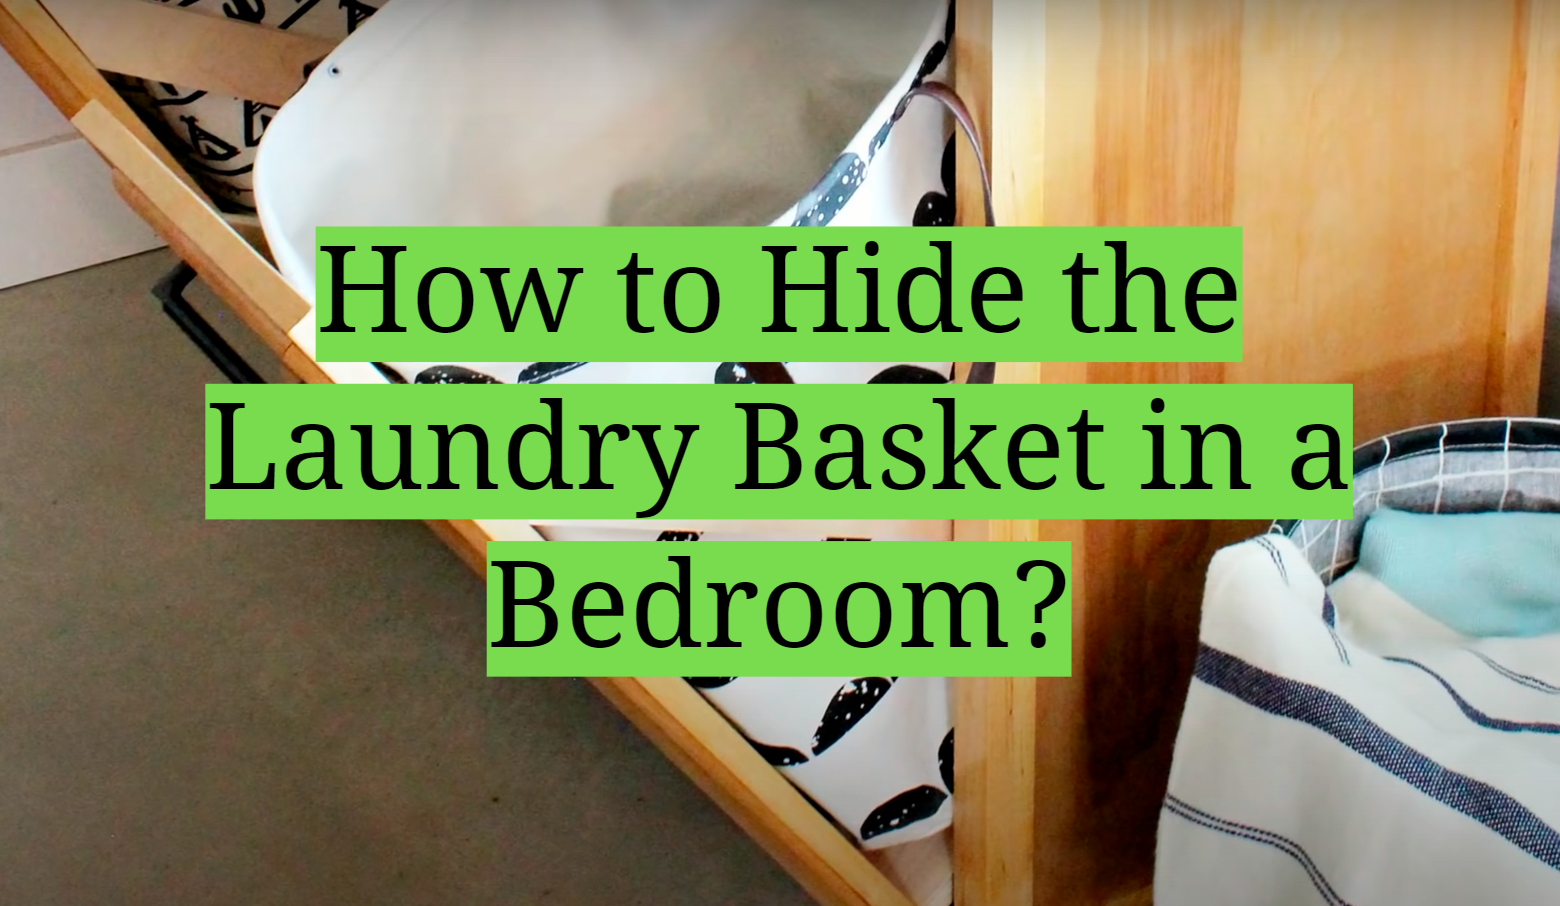 How to Hide the Laundry Basket in a Bedroom?